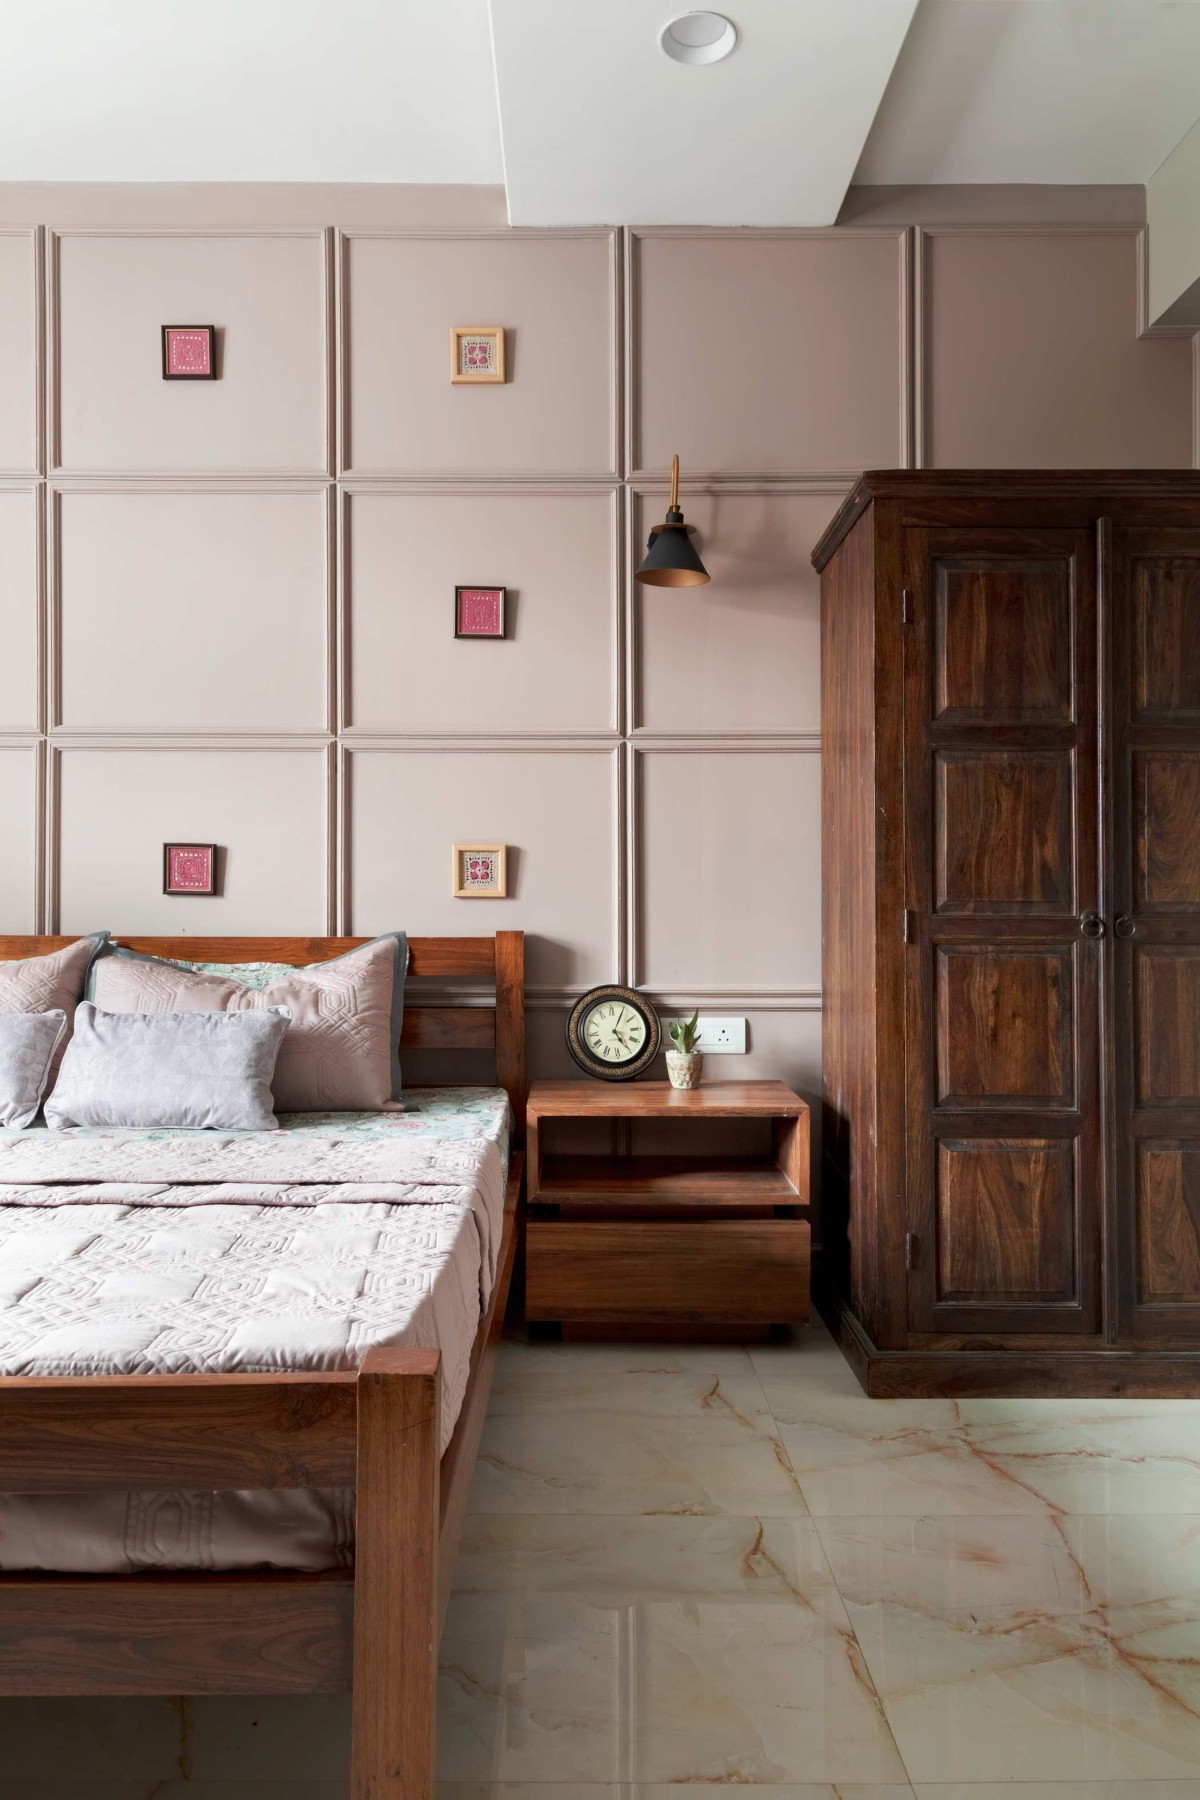 Bedroom 2 of Contemporary Flair by Phrasing Spaces